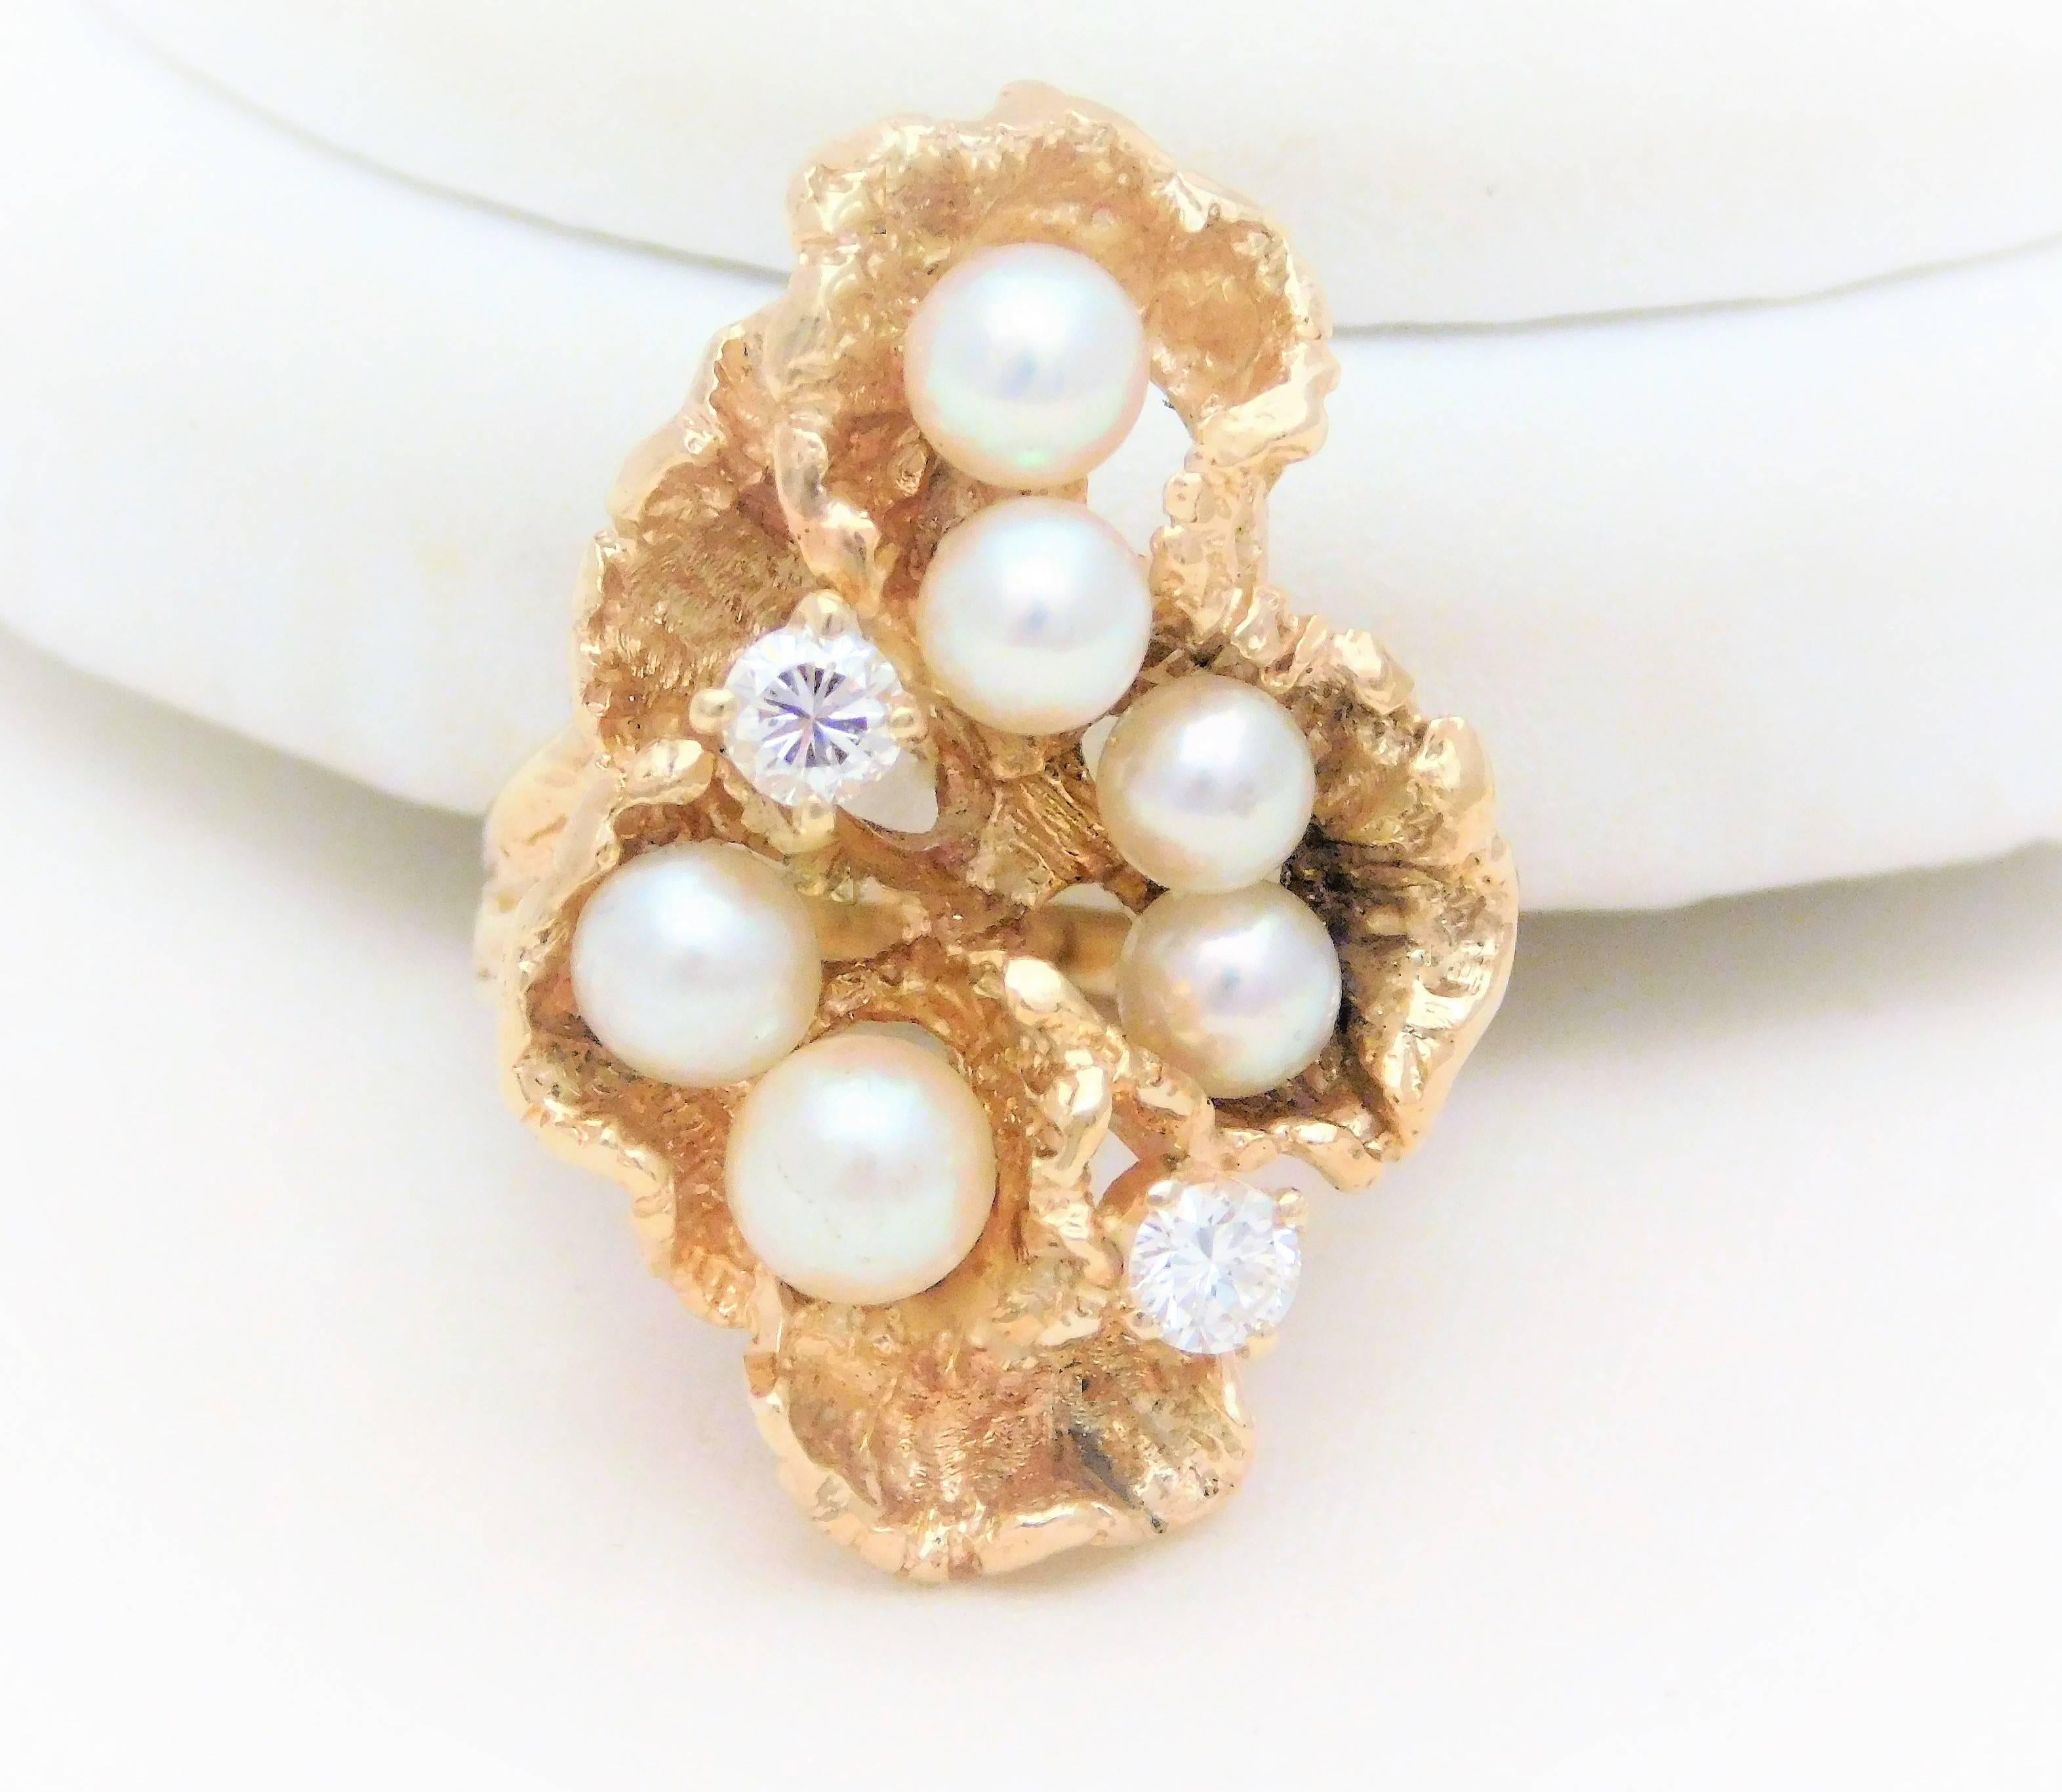 Handmade 14 Karat Diamond and Pearl “Oyster” Ring For Sale 1